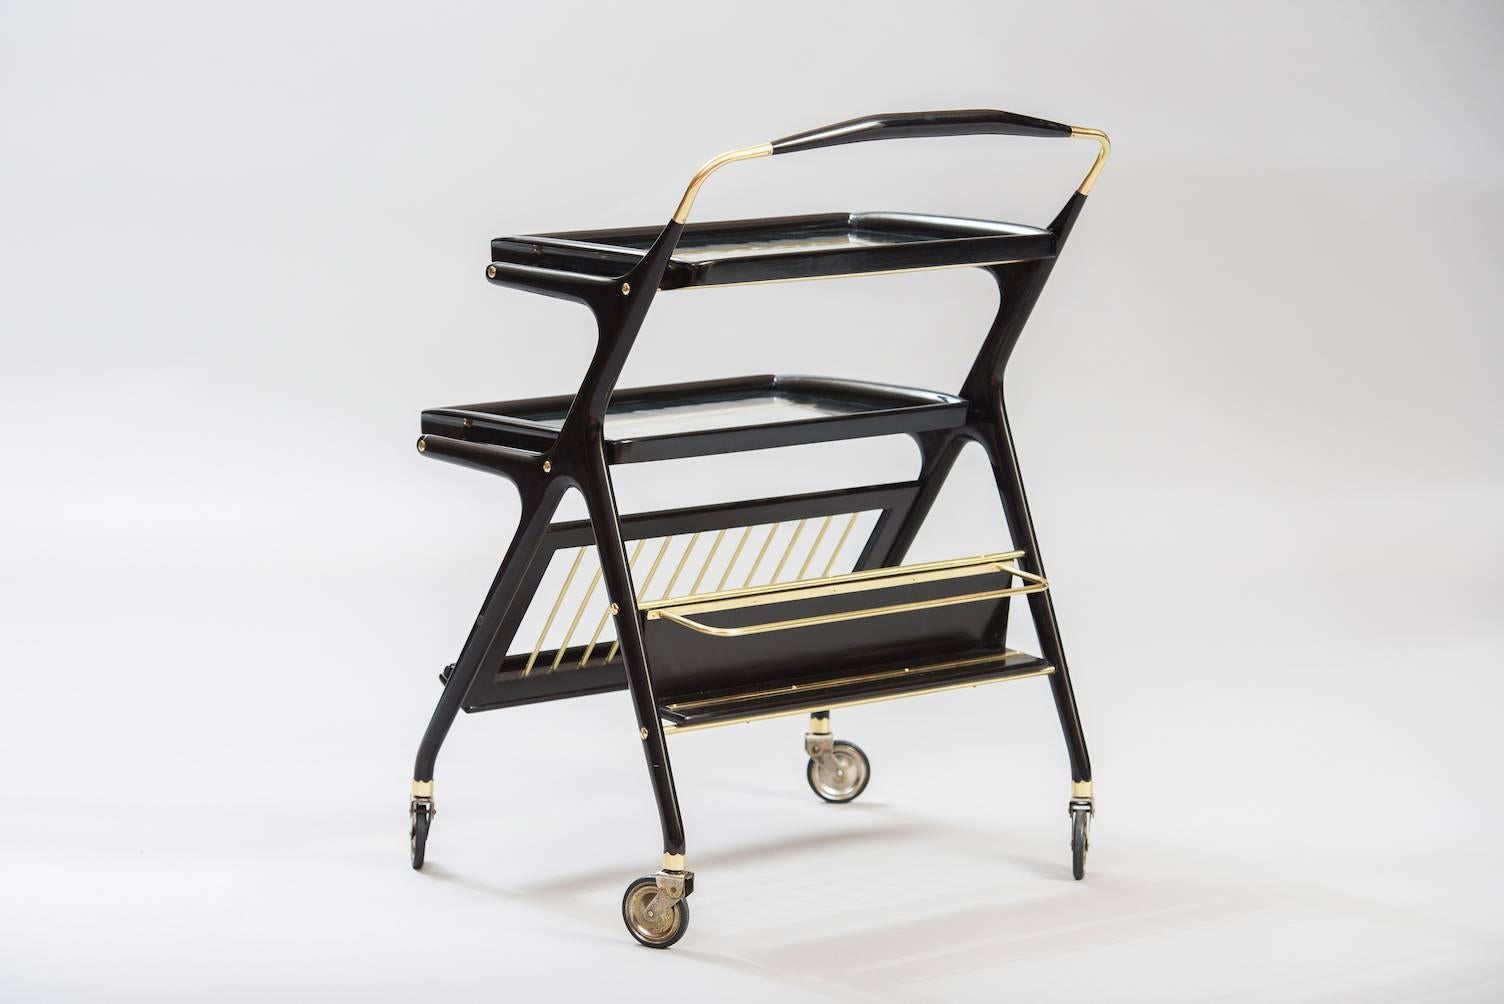 Bar cart or serving cart in ebonized wood, both upper and lower tray are removable. Bottom front rack for magazines, rear shelf for bottles.